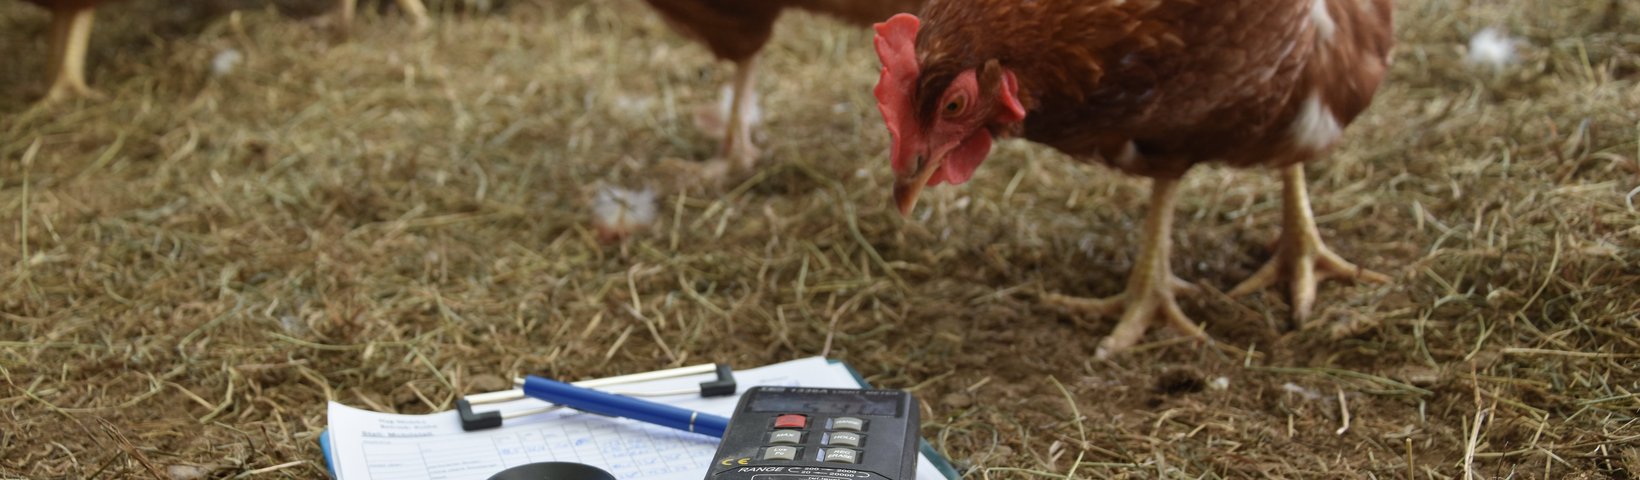 Photo: A chicken is curiously leaning its head towards a clipboard with paper, a pen and a measuring device lying in the straw. 